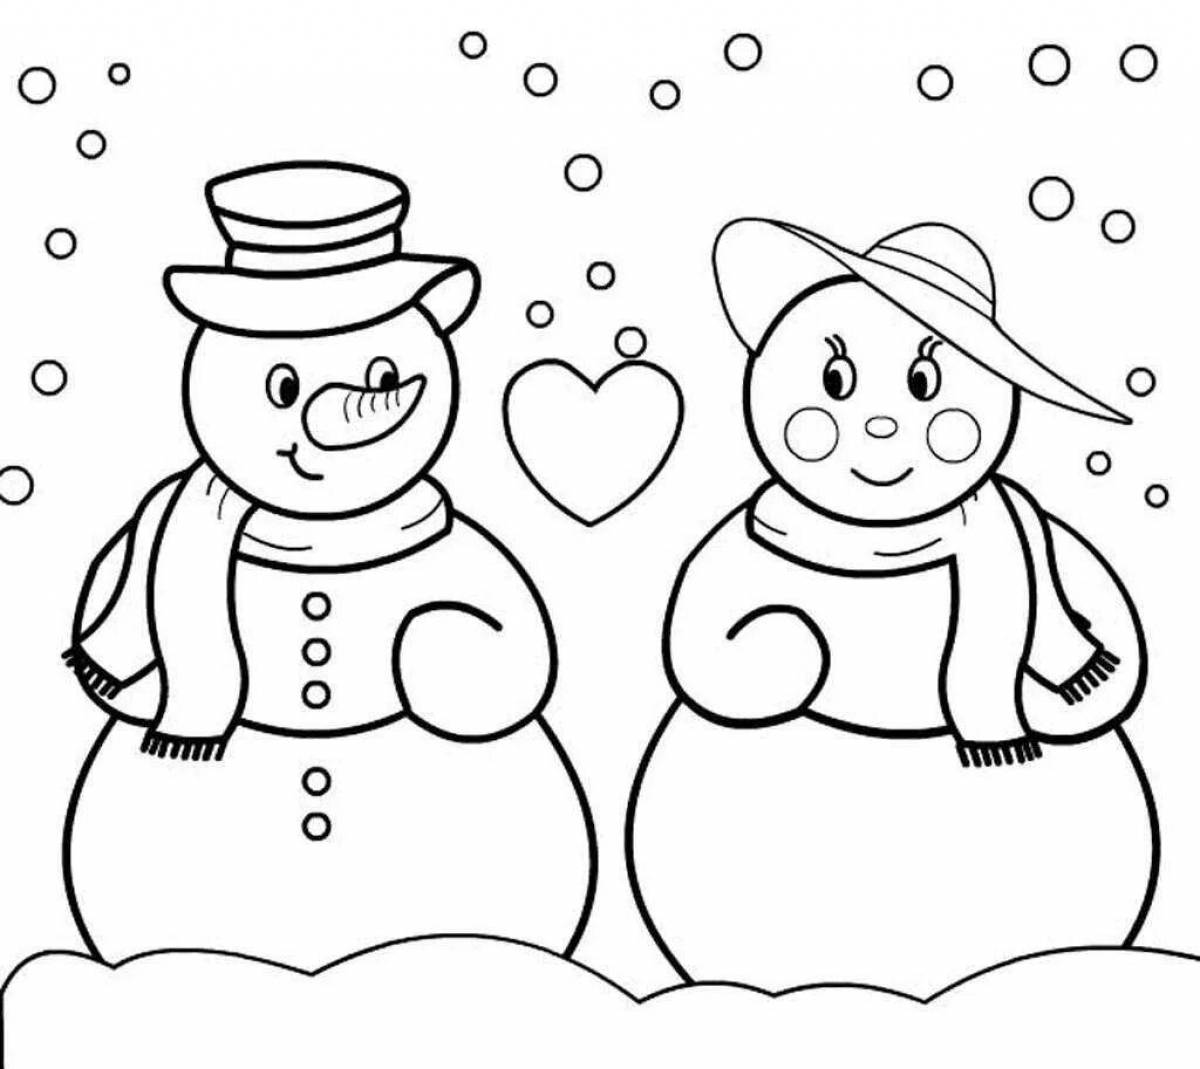 Wacky coloring page funny snowman for kids